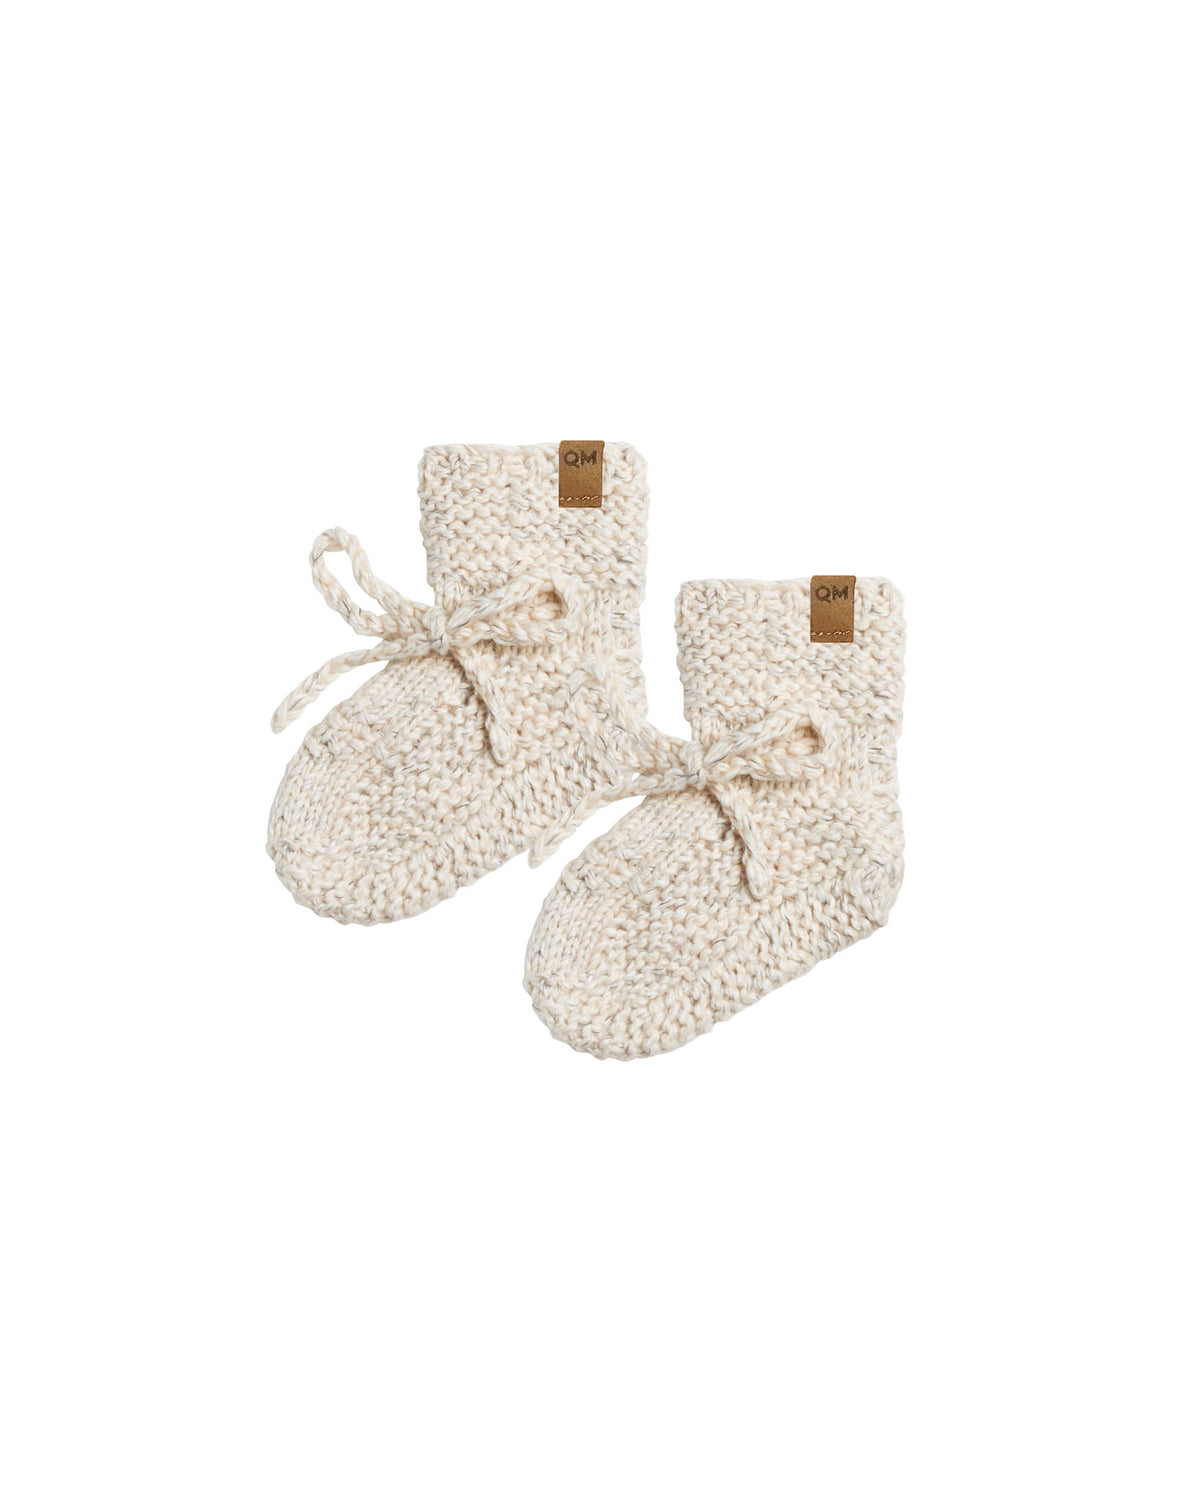 Quincy Mae | Knit Booties || Natural Speckled